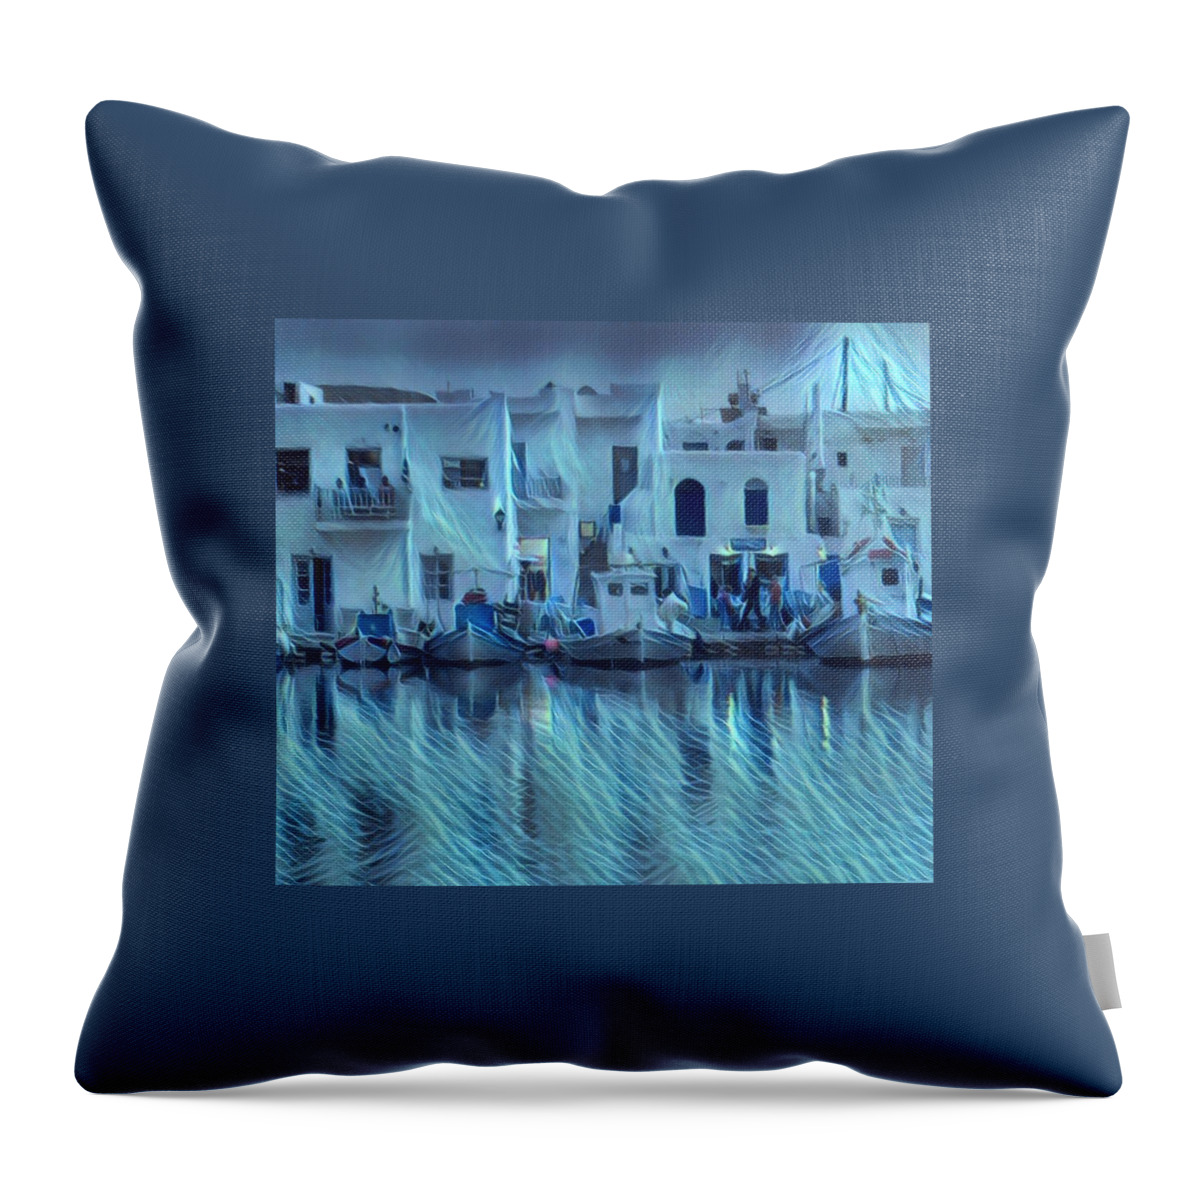 Colette Throw Pillow featuring the photograph Paros Island Beauty Greece by Colette V Hera Guggenheim